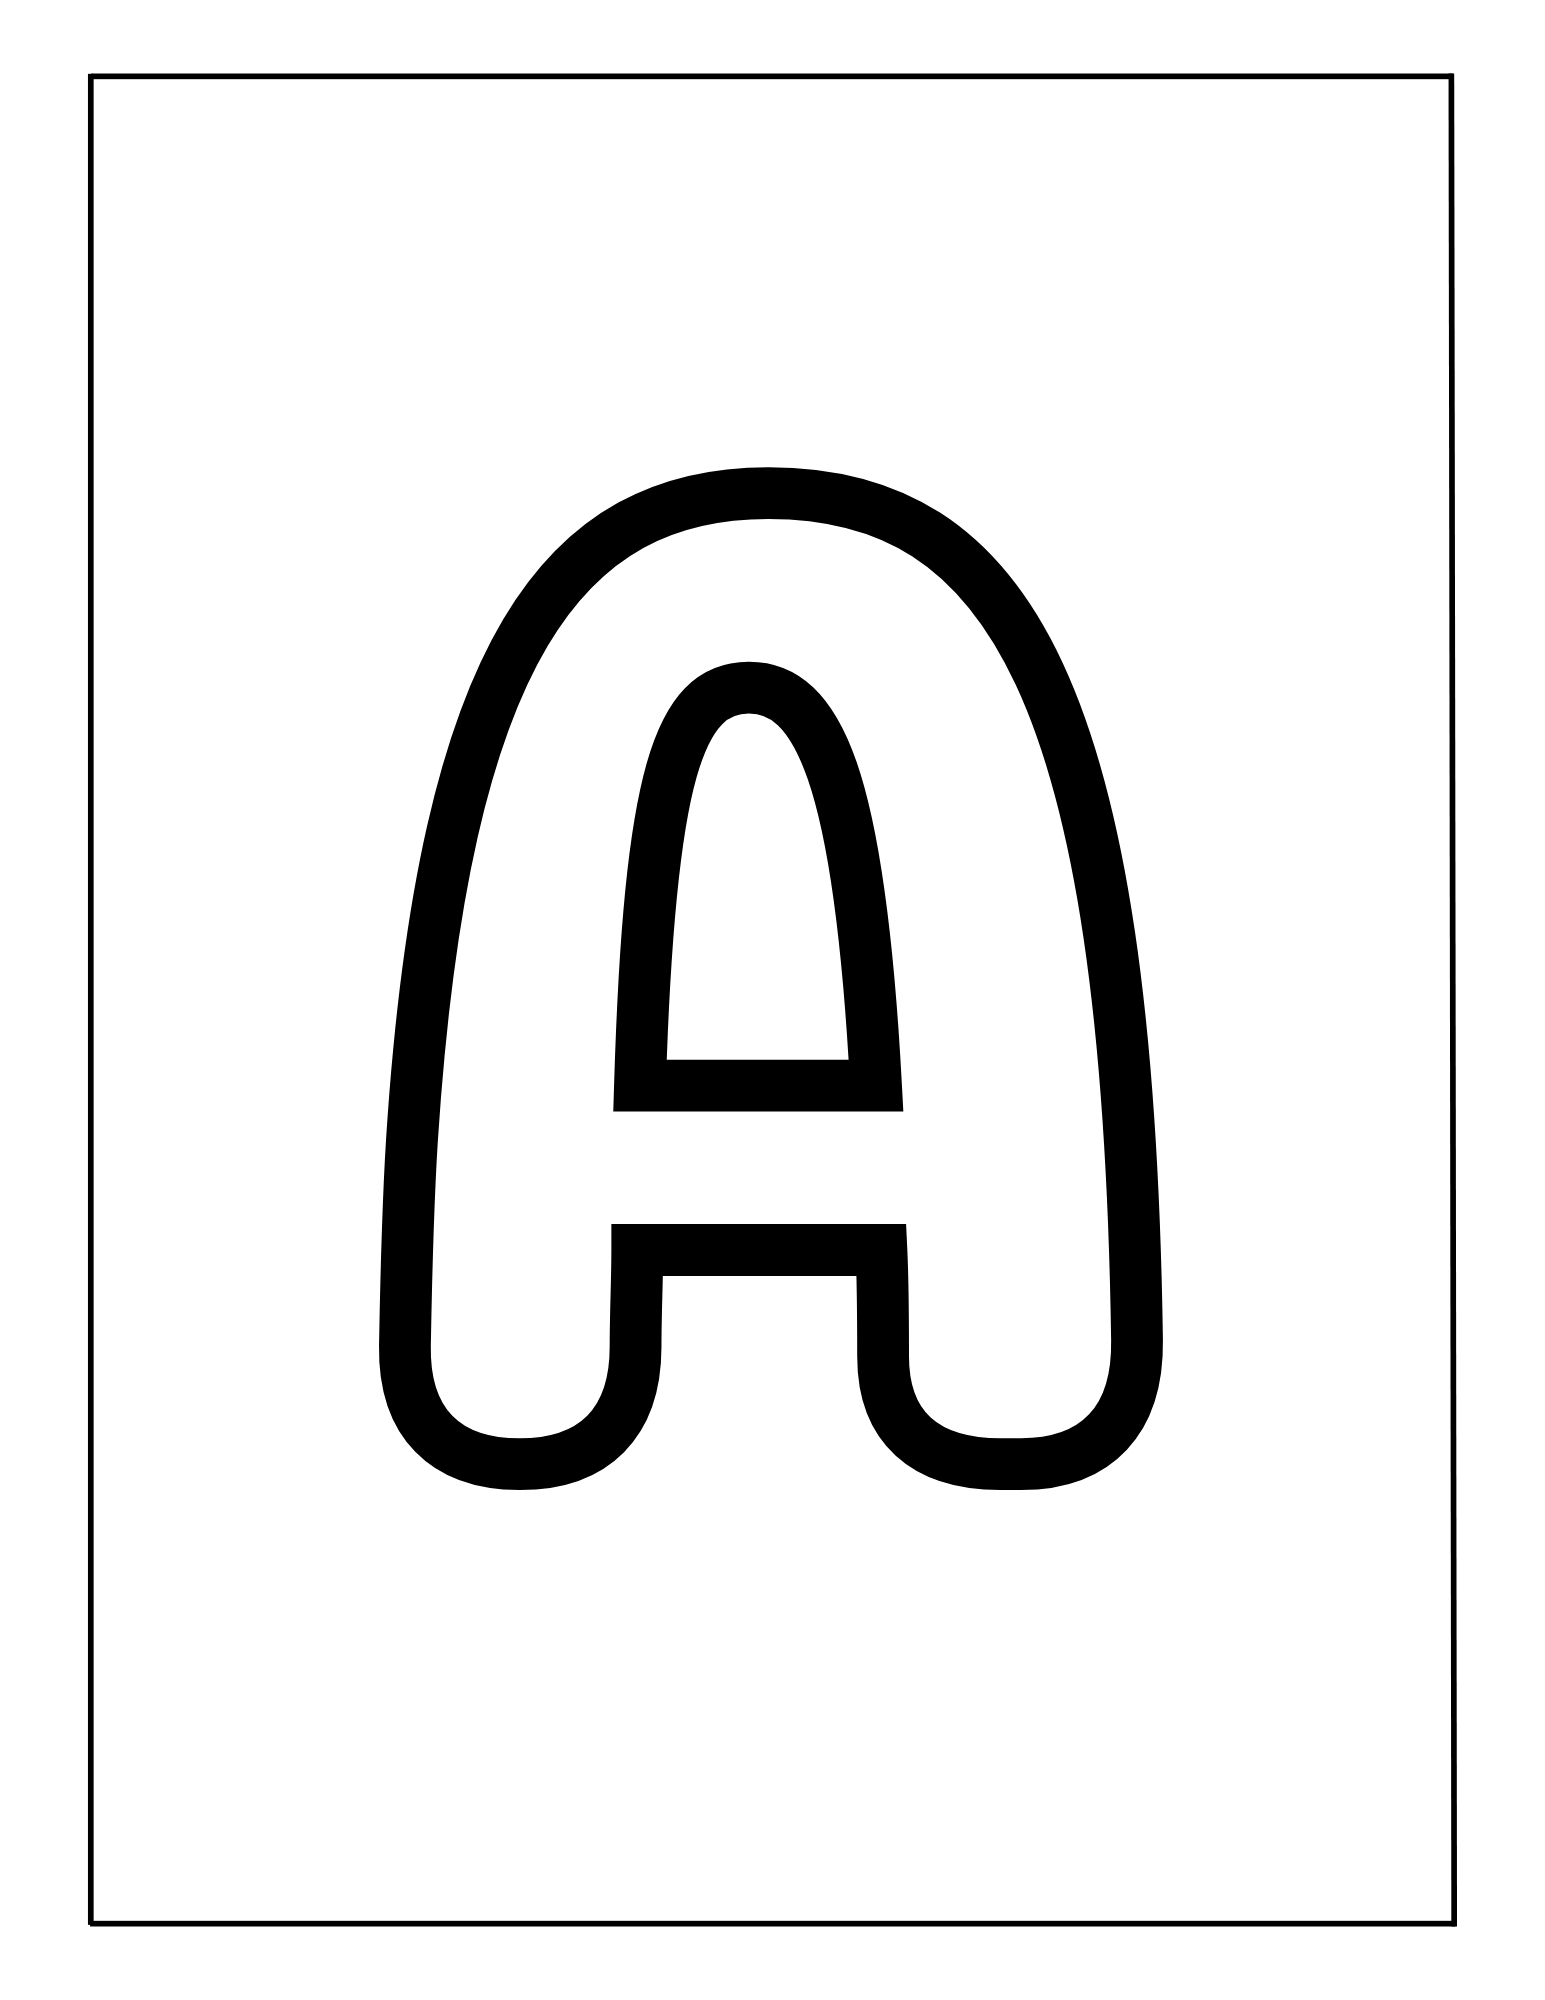 Alphabet Coloring Pages A-Z for learning.